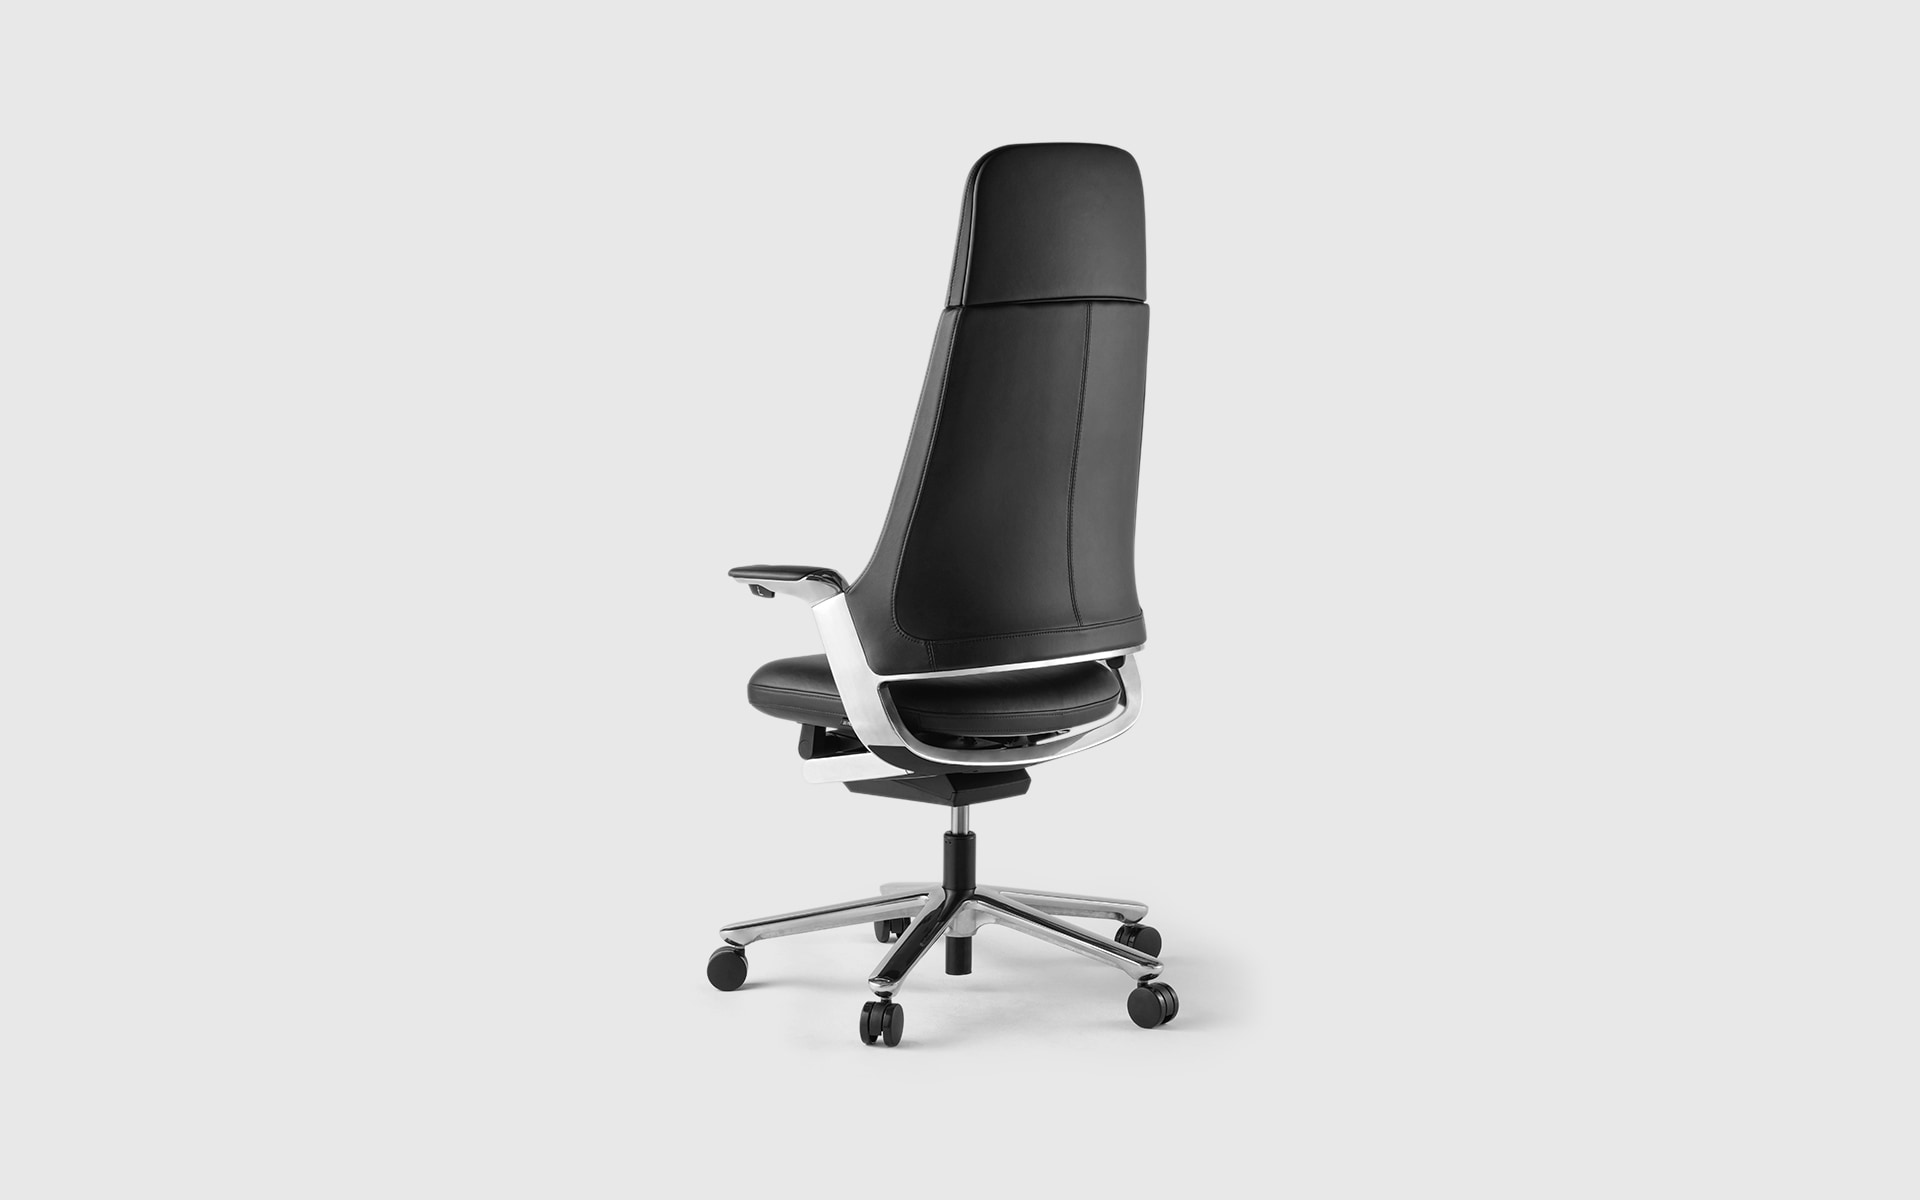 The ITOKI Leonis executive chair by ITO Design in black leather